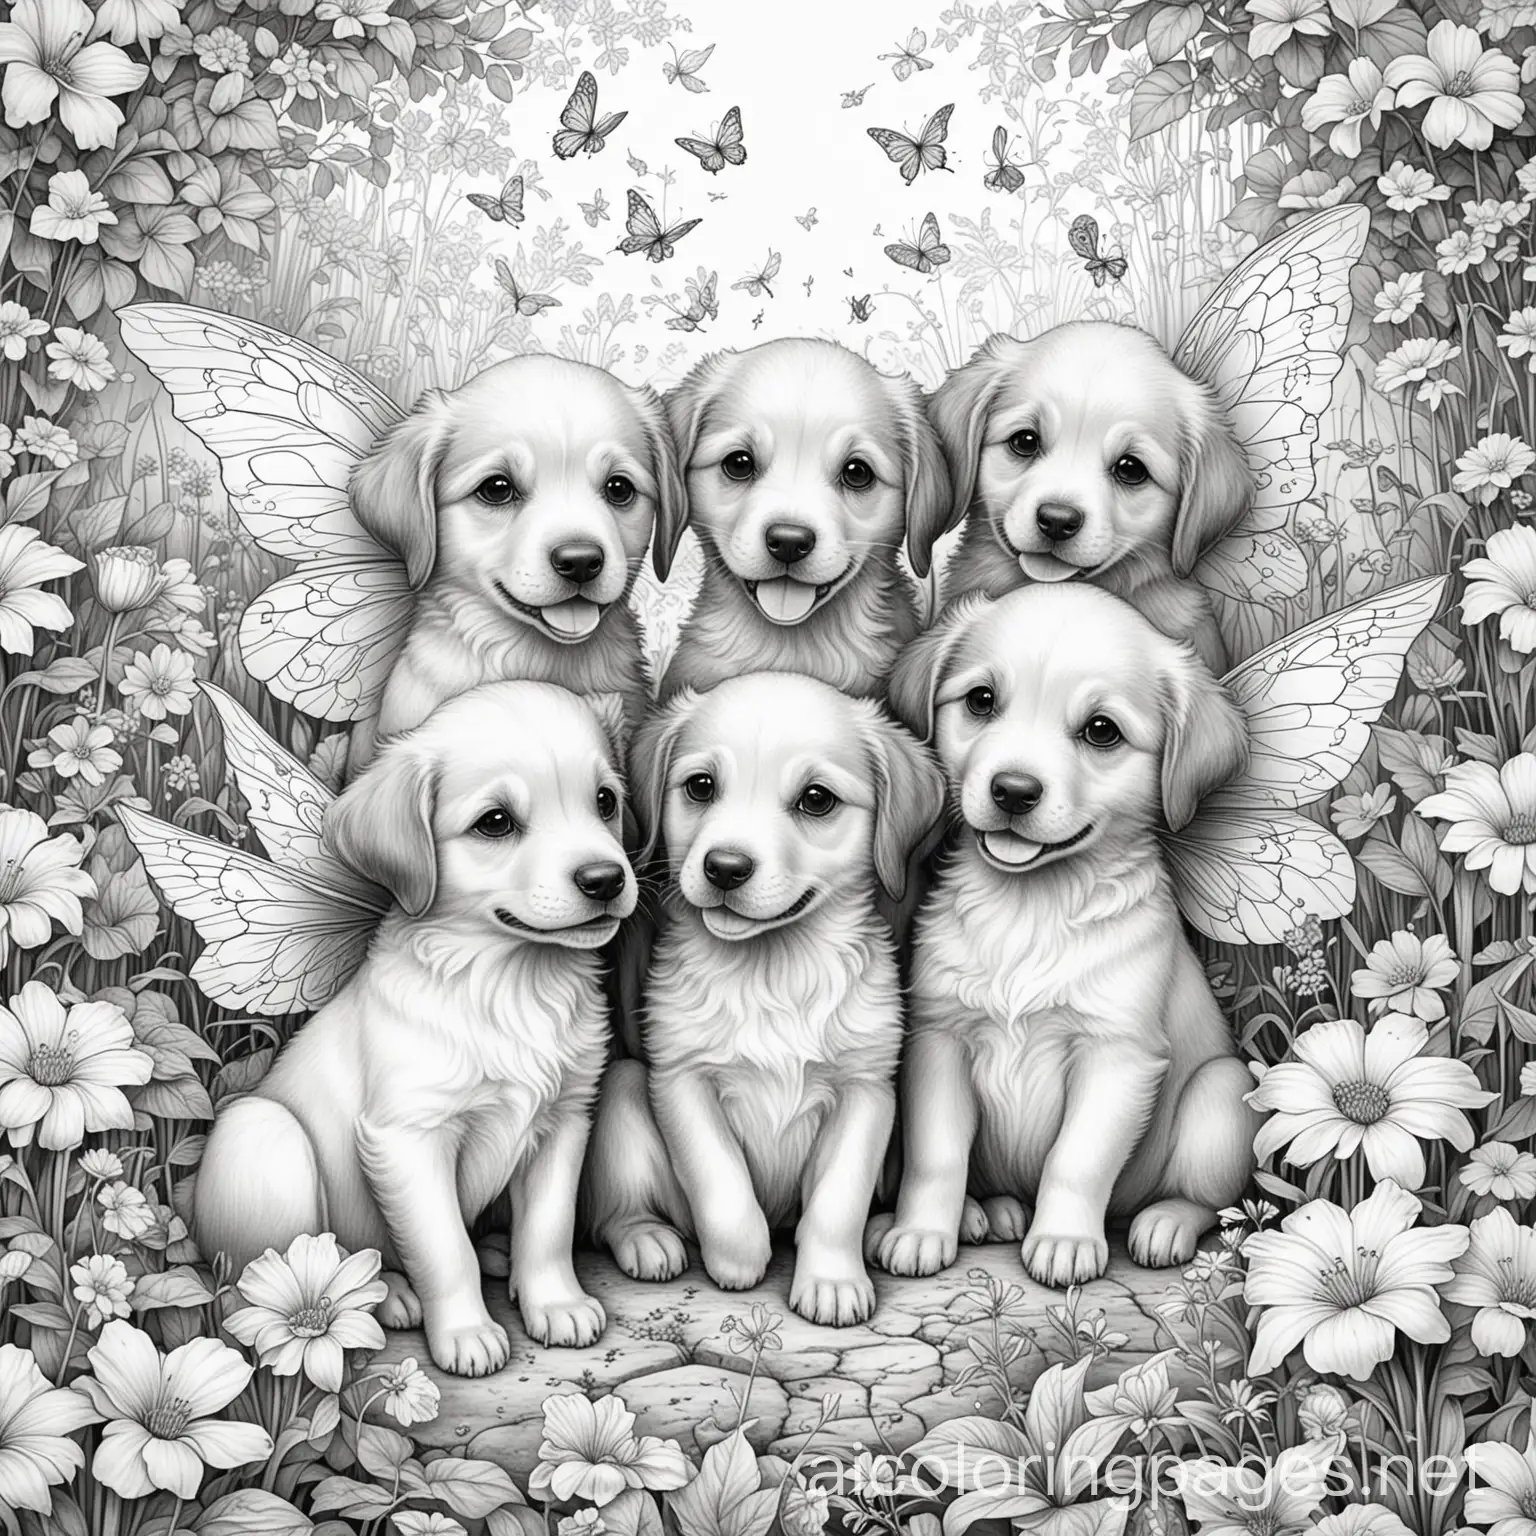 happy puppies surrounded by kind fairies in a flower garden, Coloring Page, black and white, line art, white background, Simplicity, Ample White Space